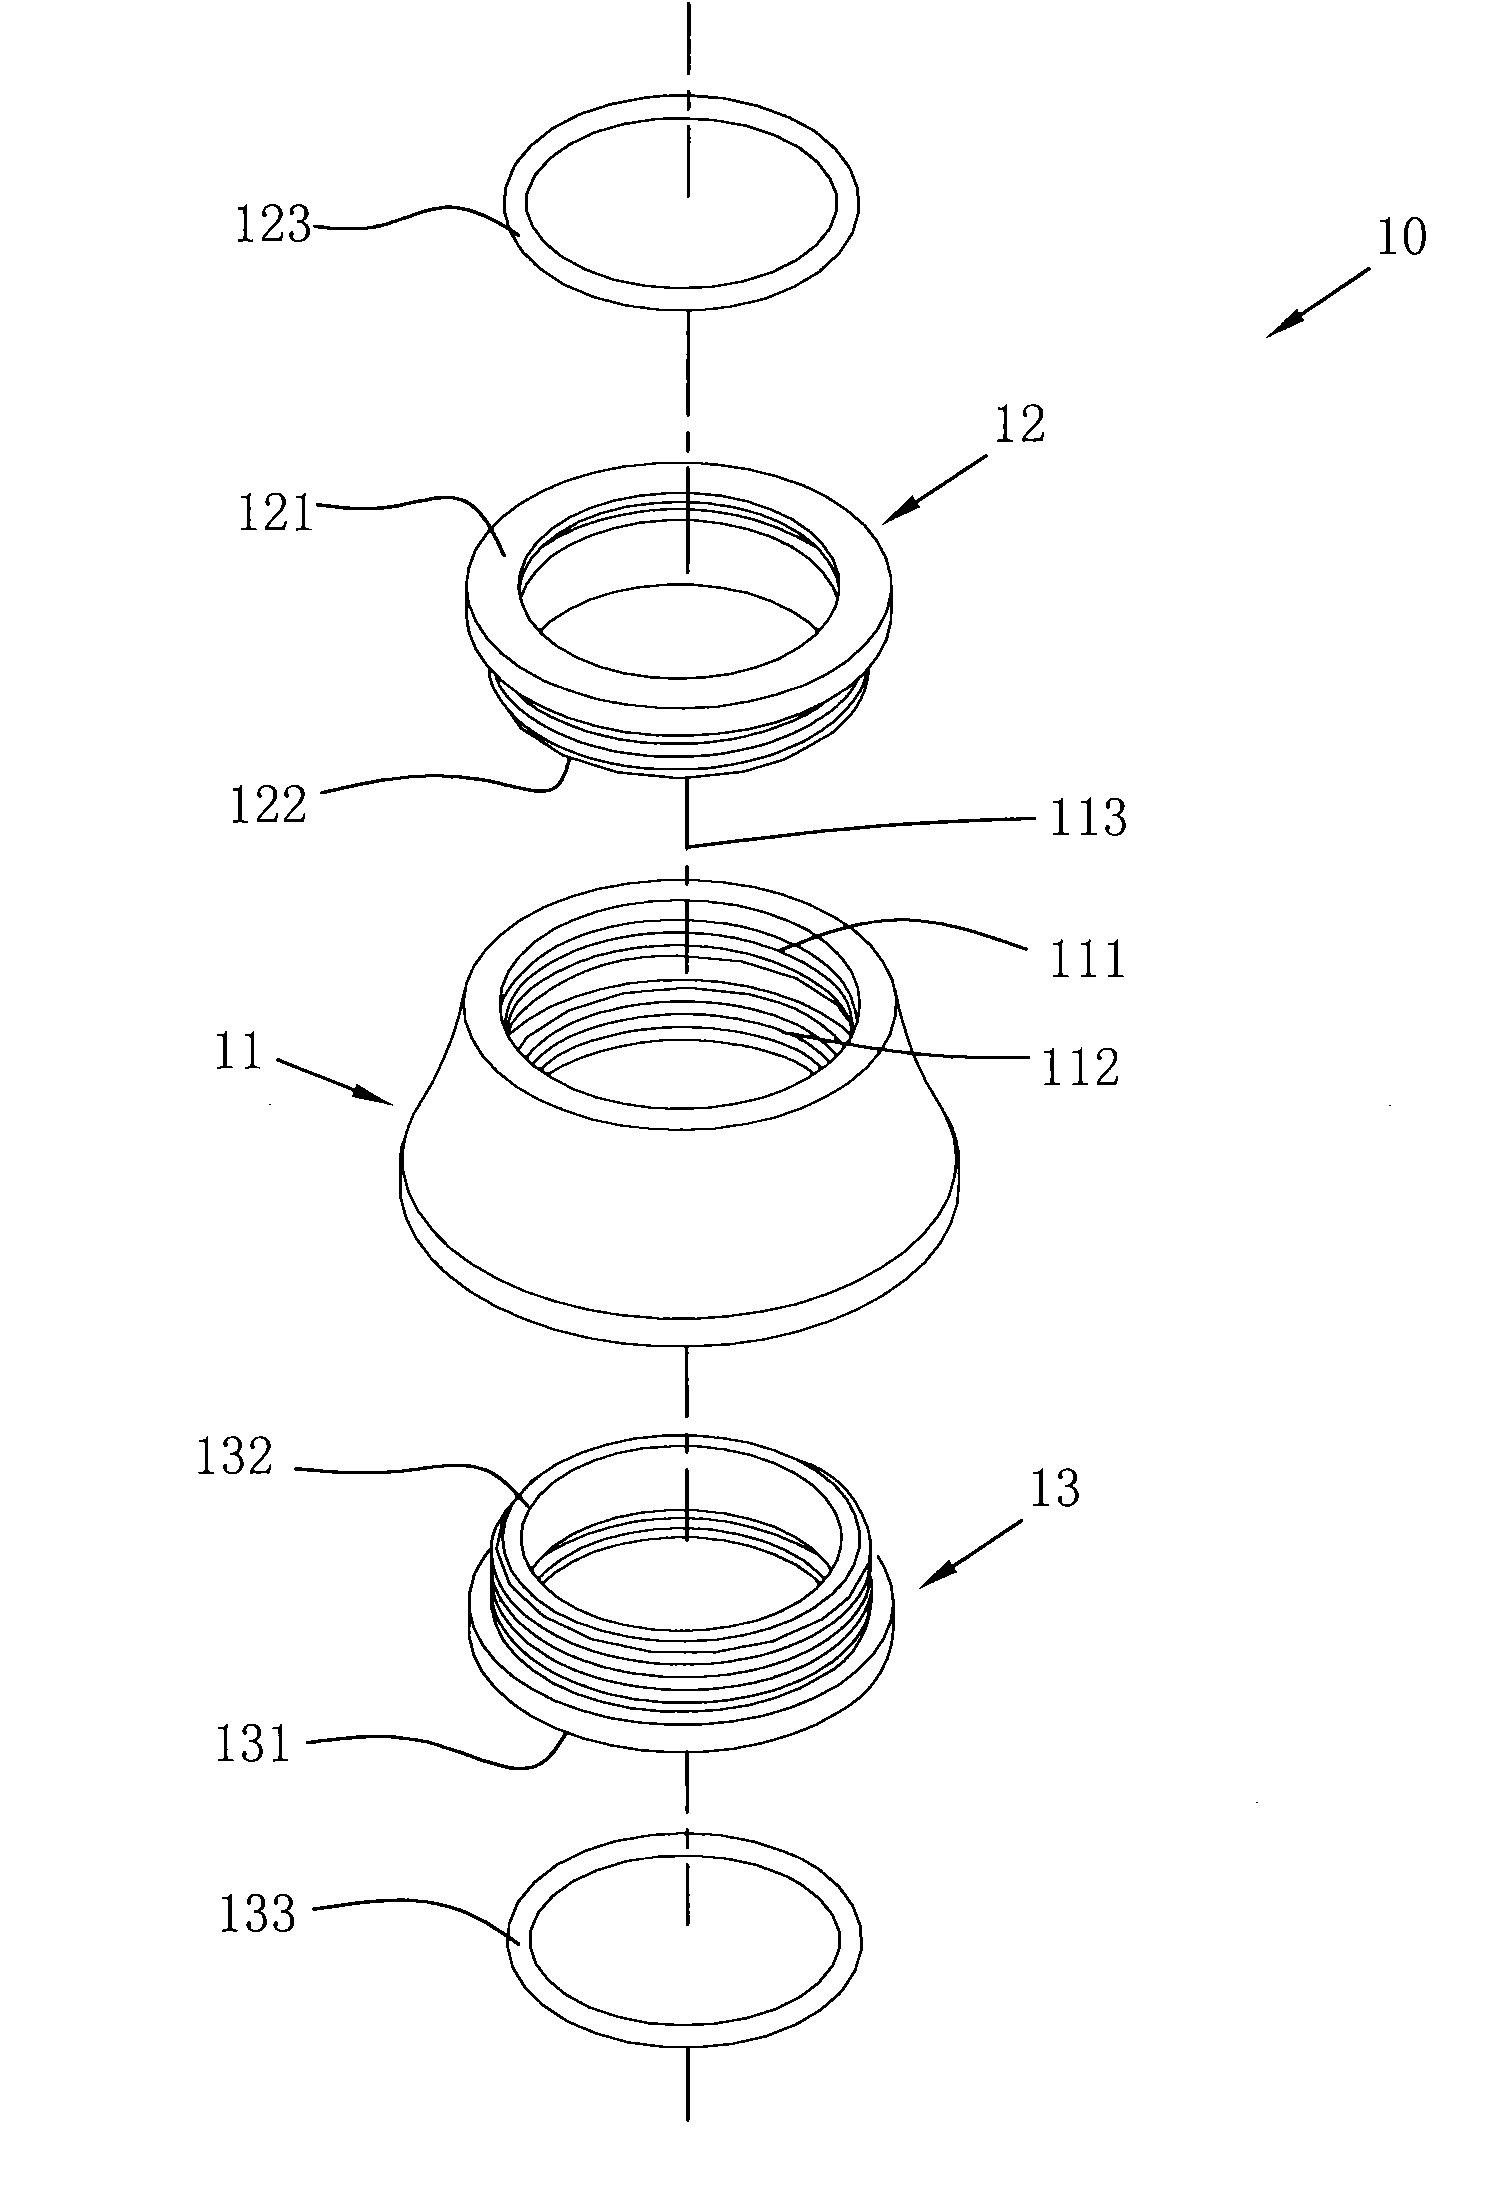 Headset upper cover structure having function of forcing regulation